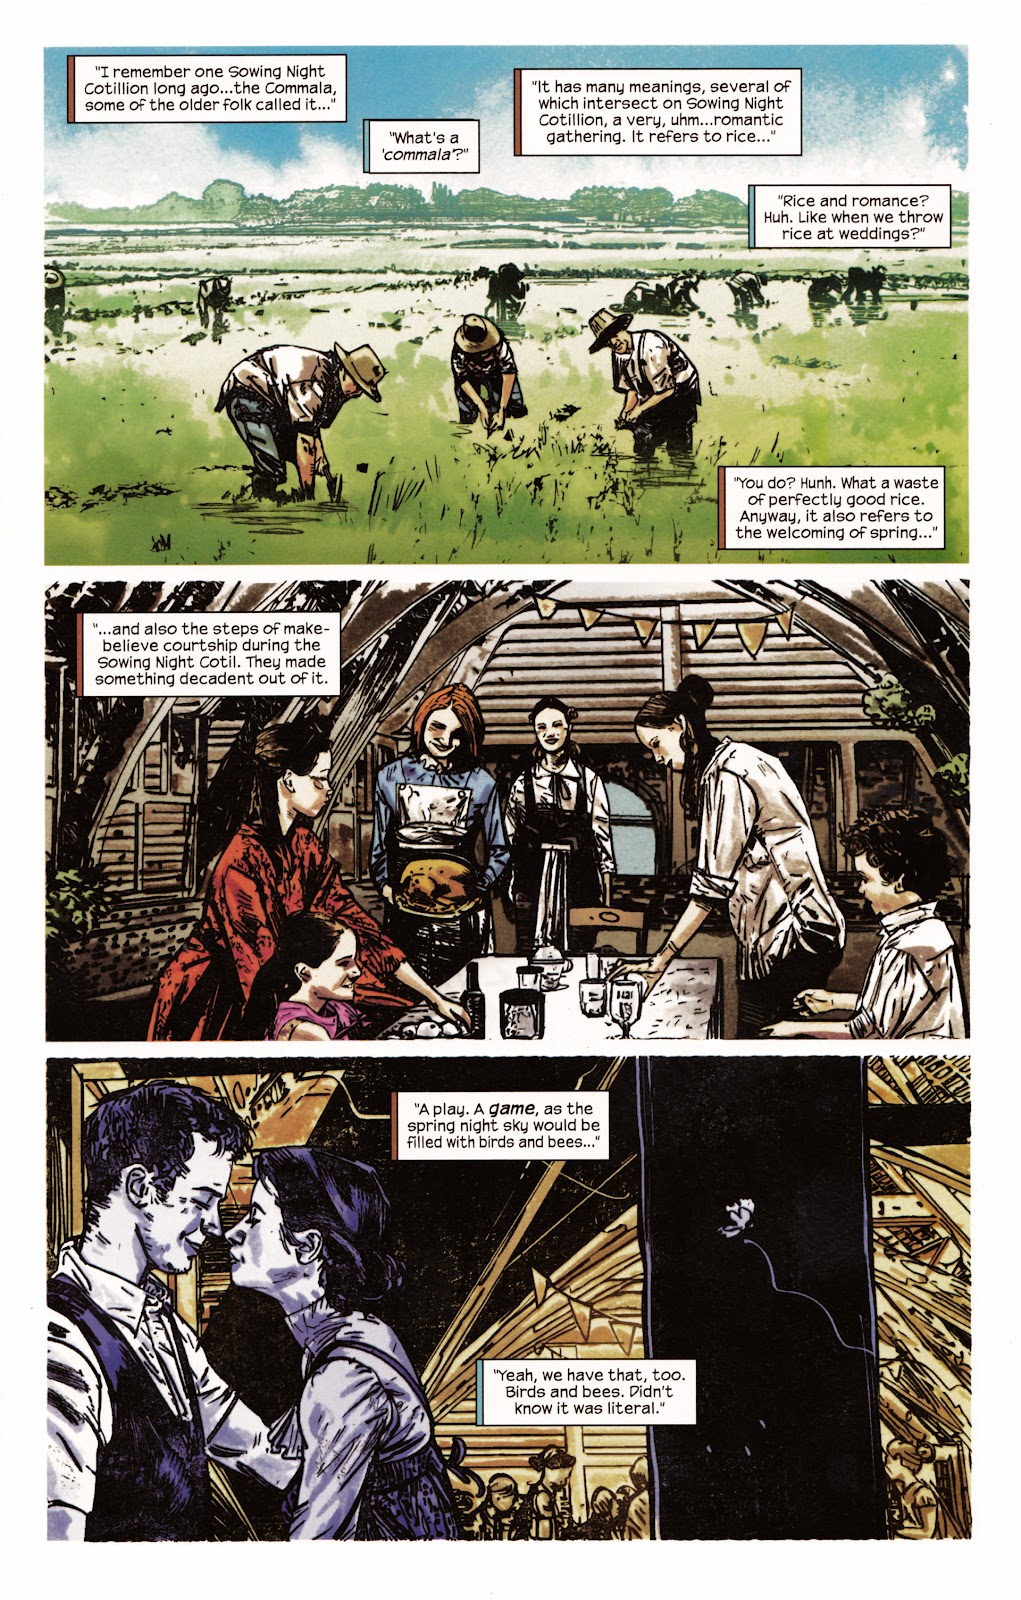 Dark Tower: The Gunslinger - The Man in Black issue 2 - Page 14